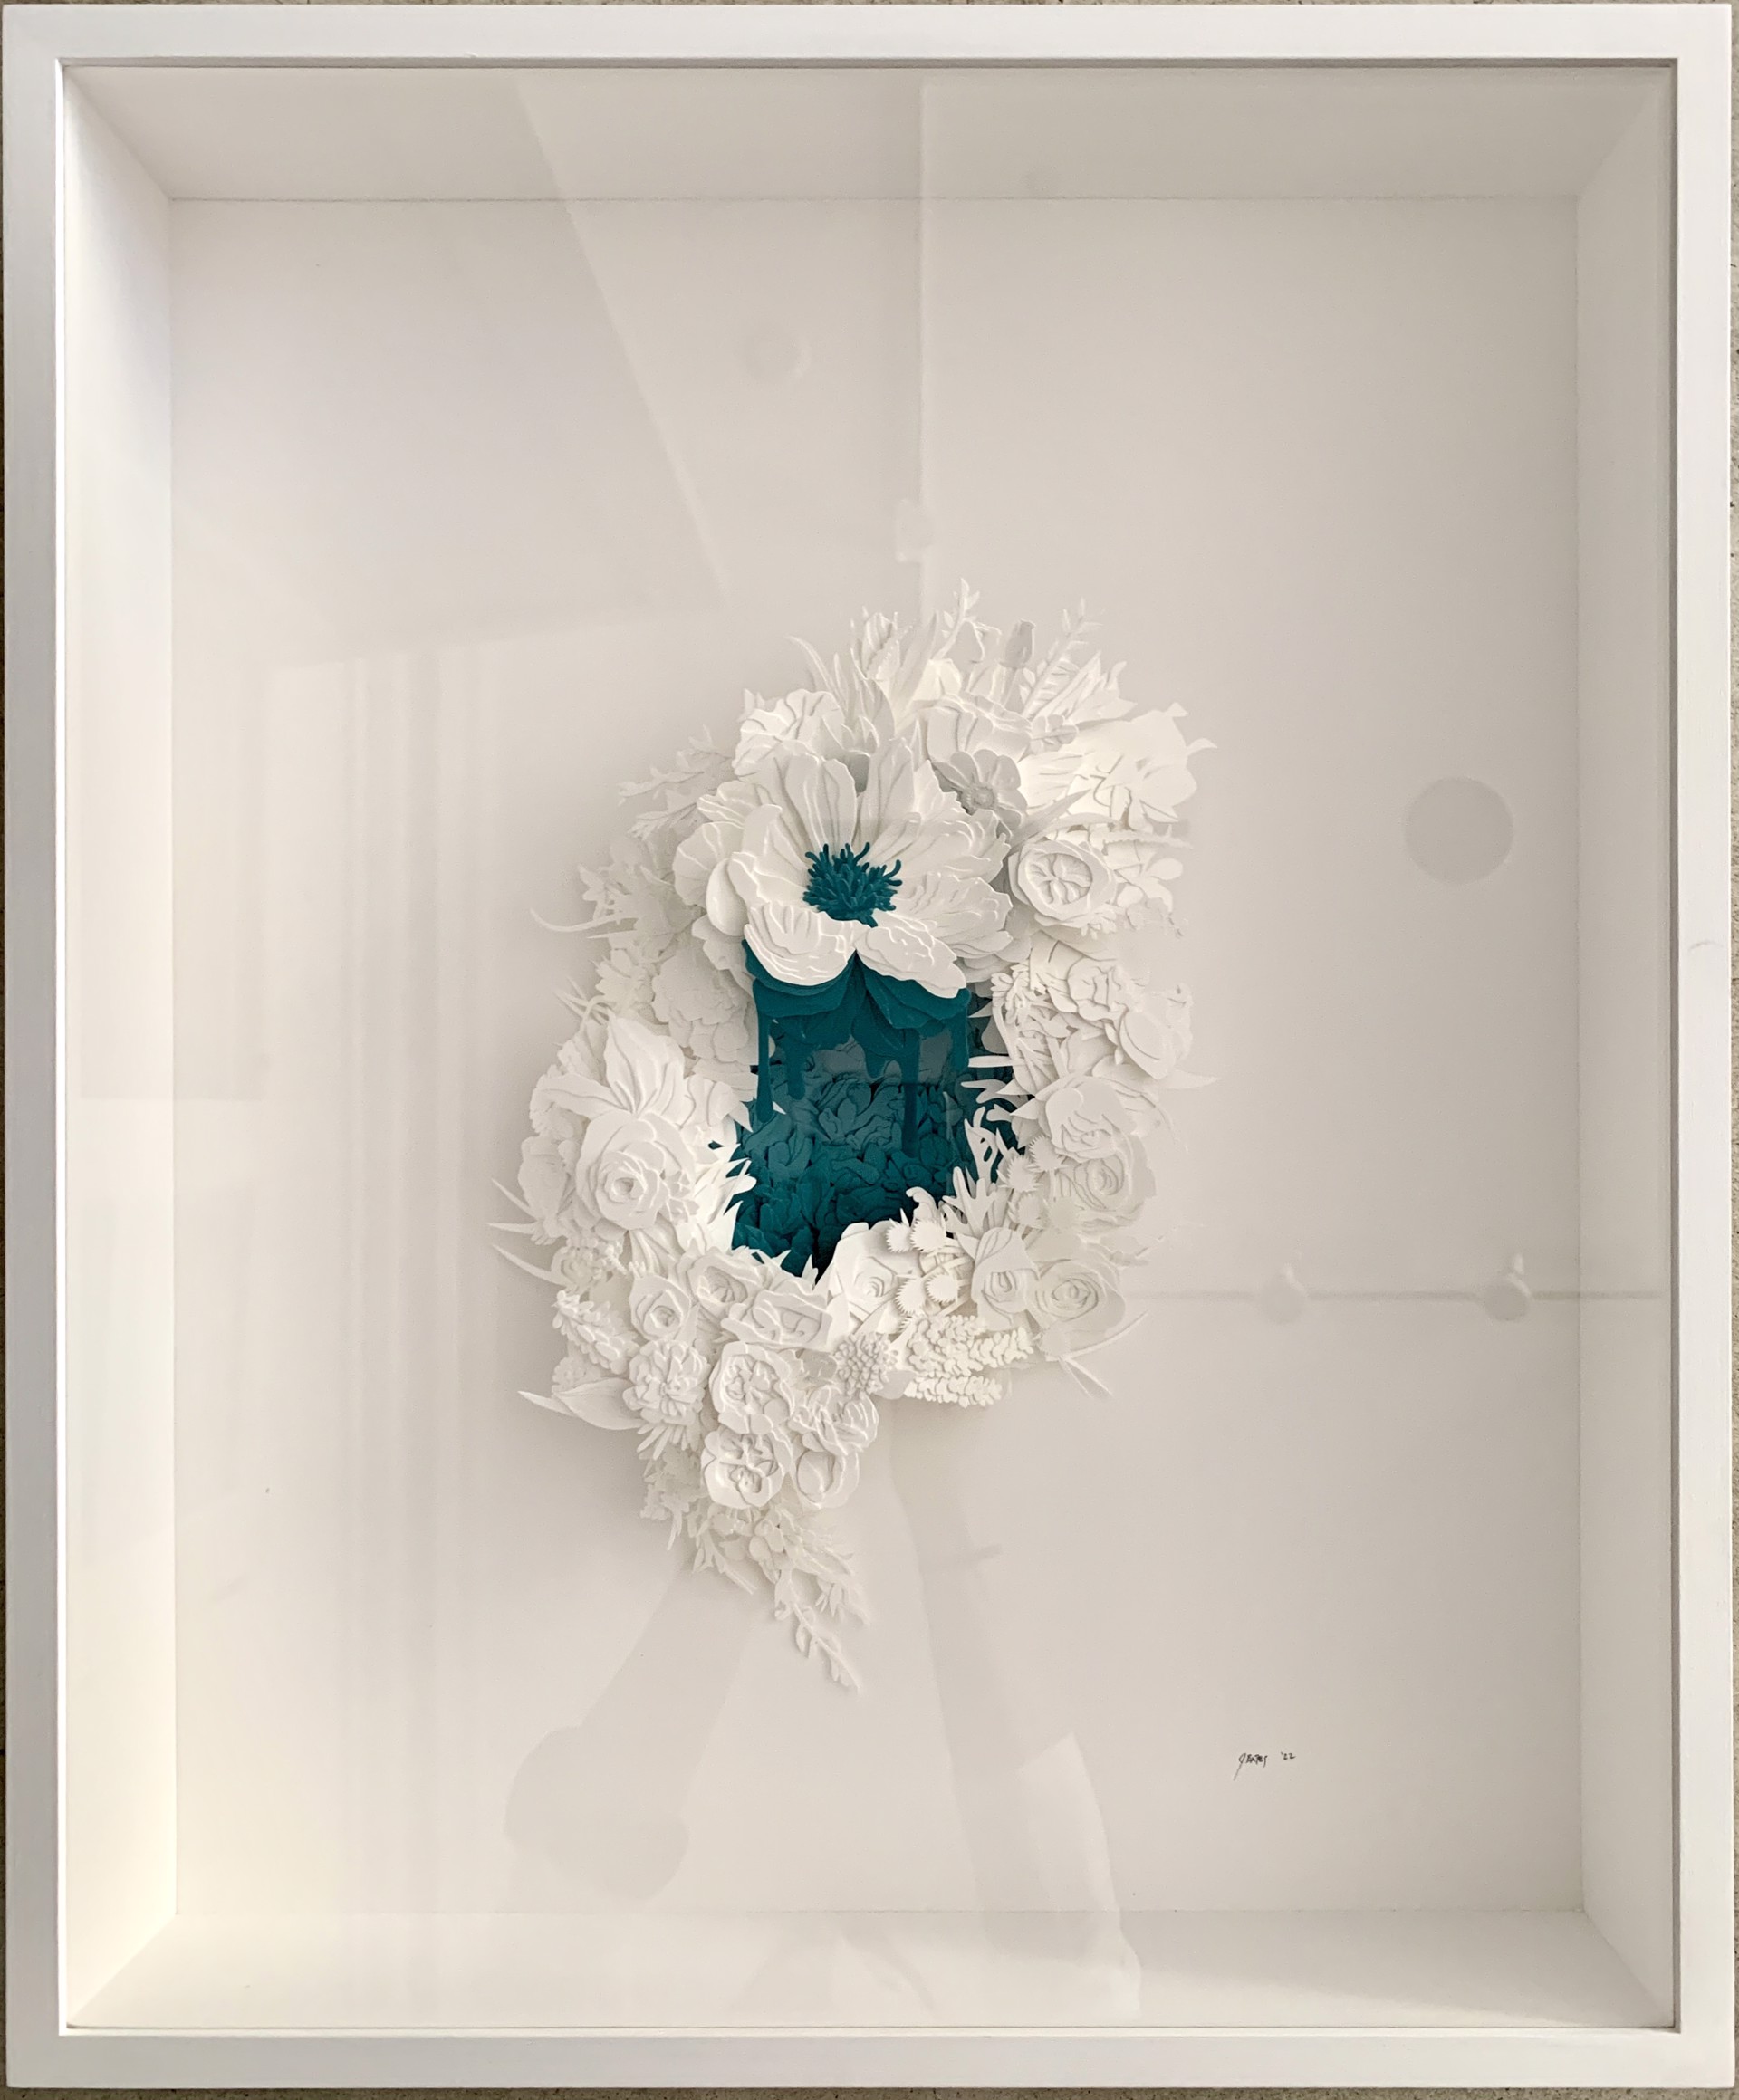 Explosion #16 with a Cobalt Turquoise Drip by Joey Bates